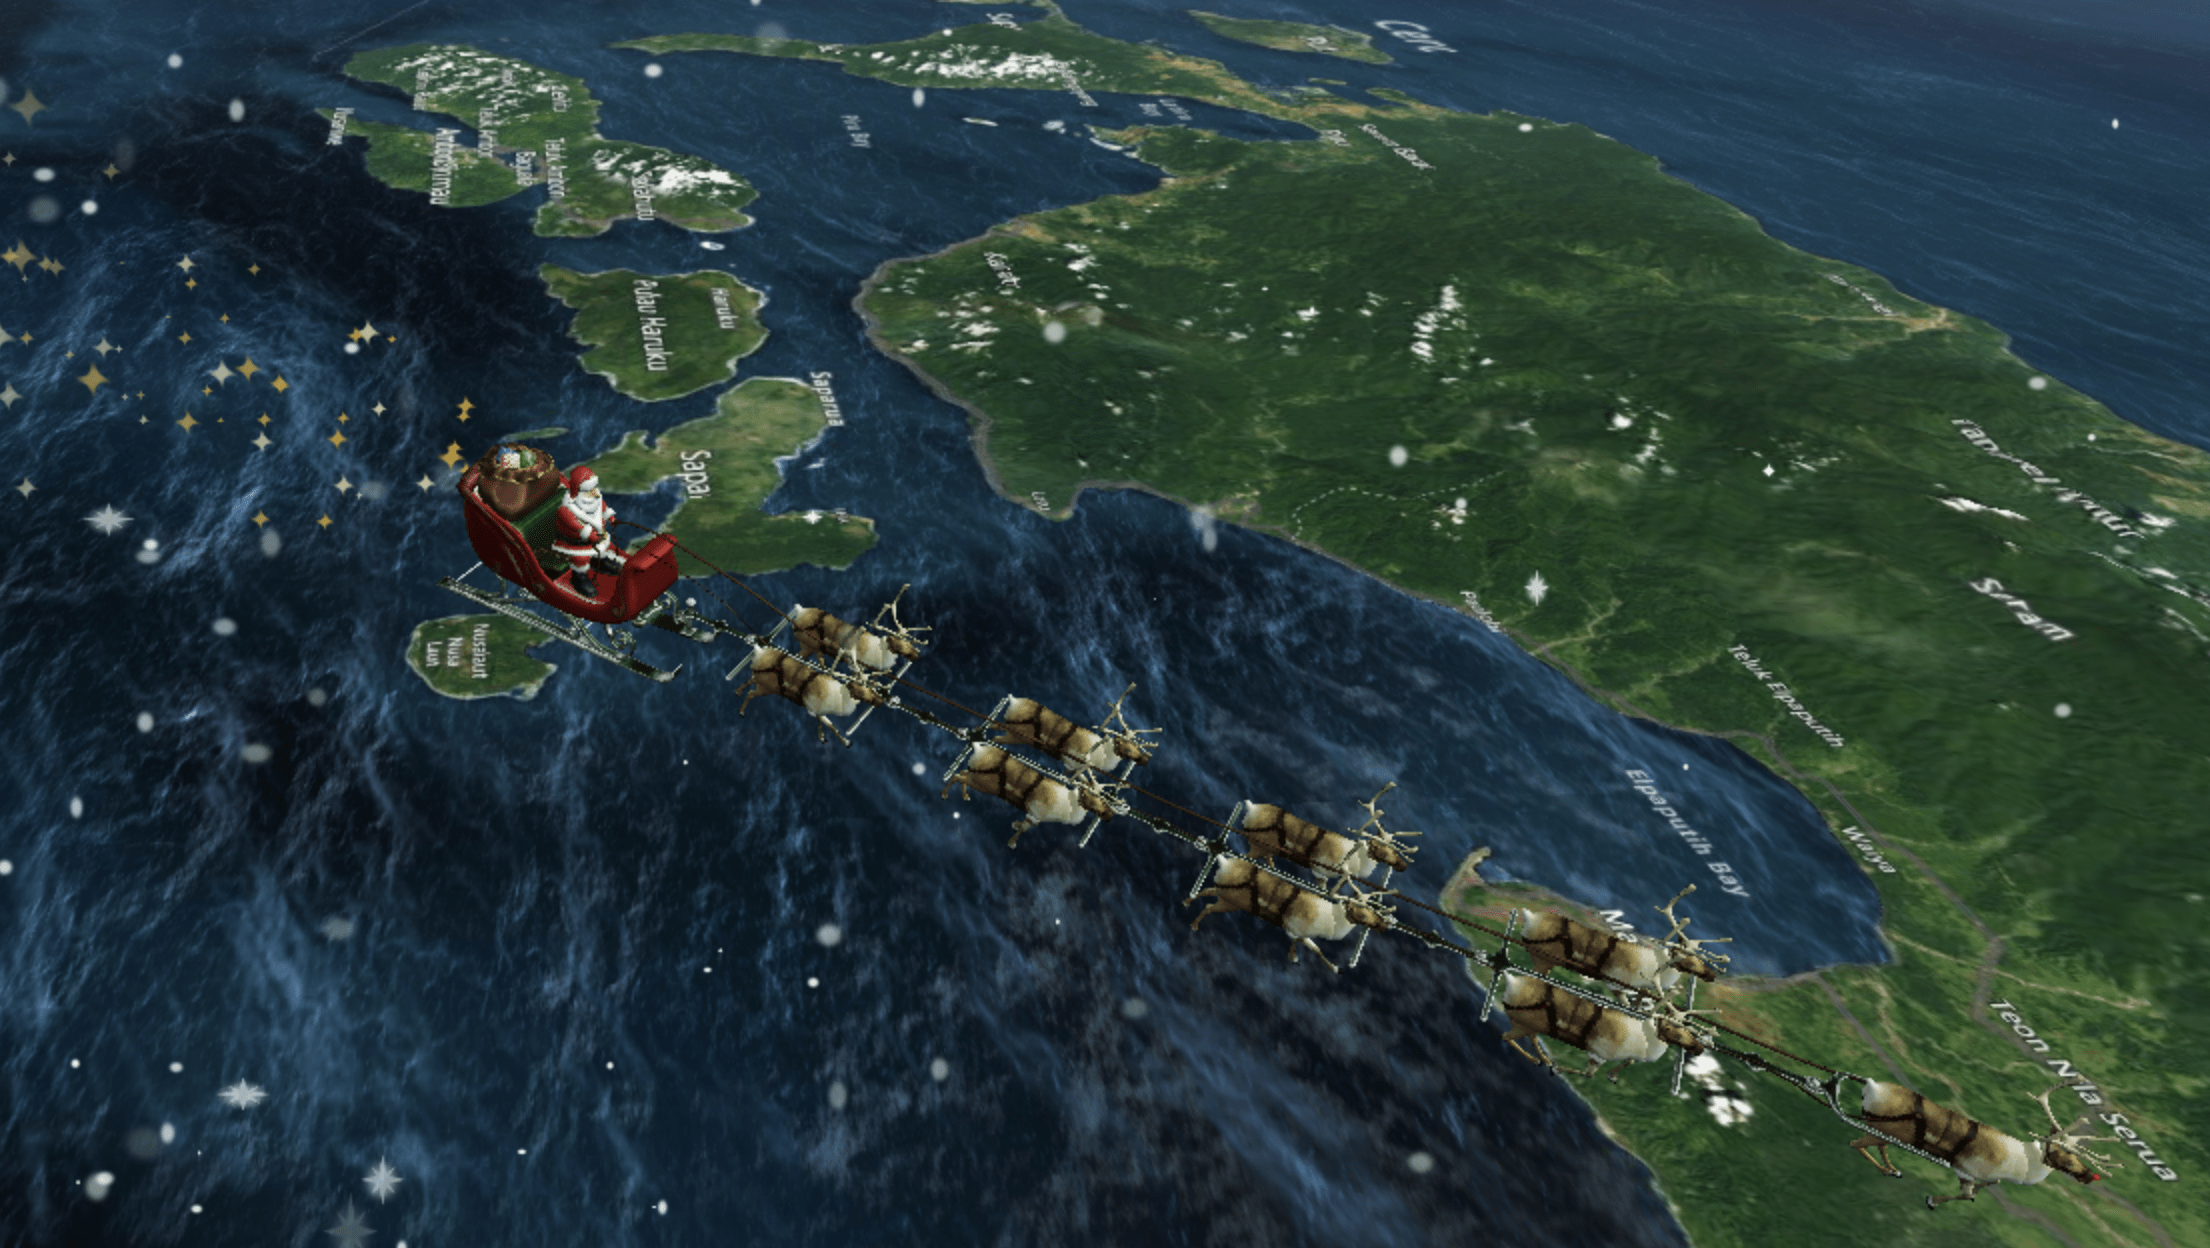 Where in the World is Santa Claus?